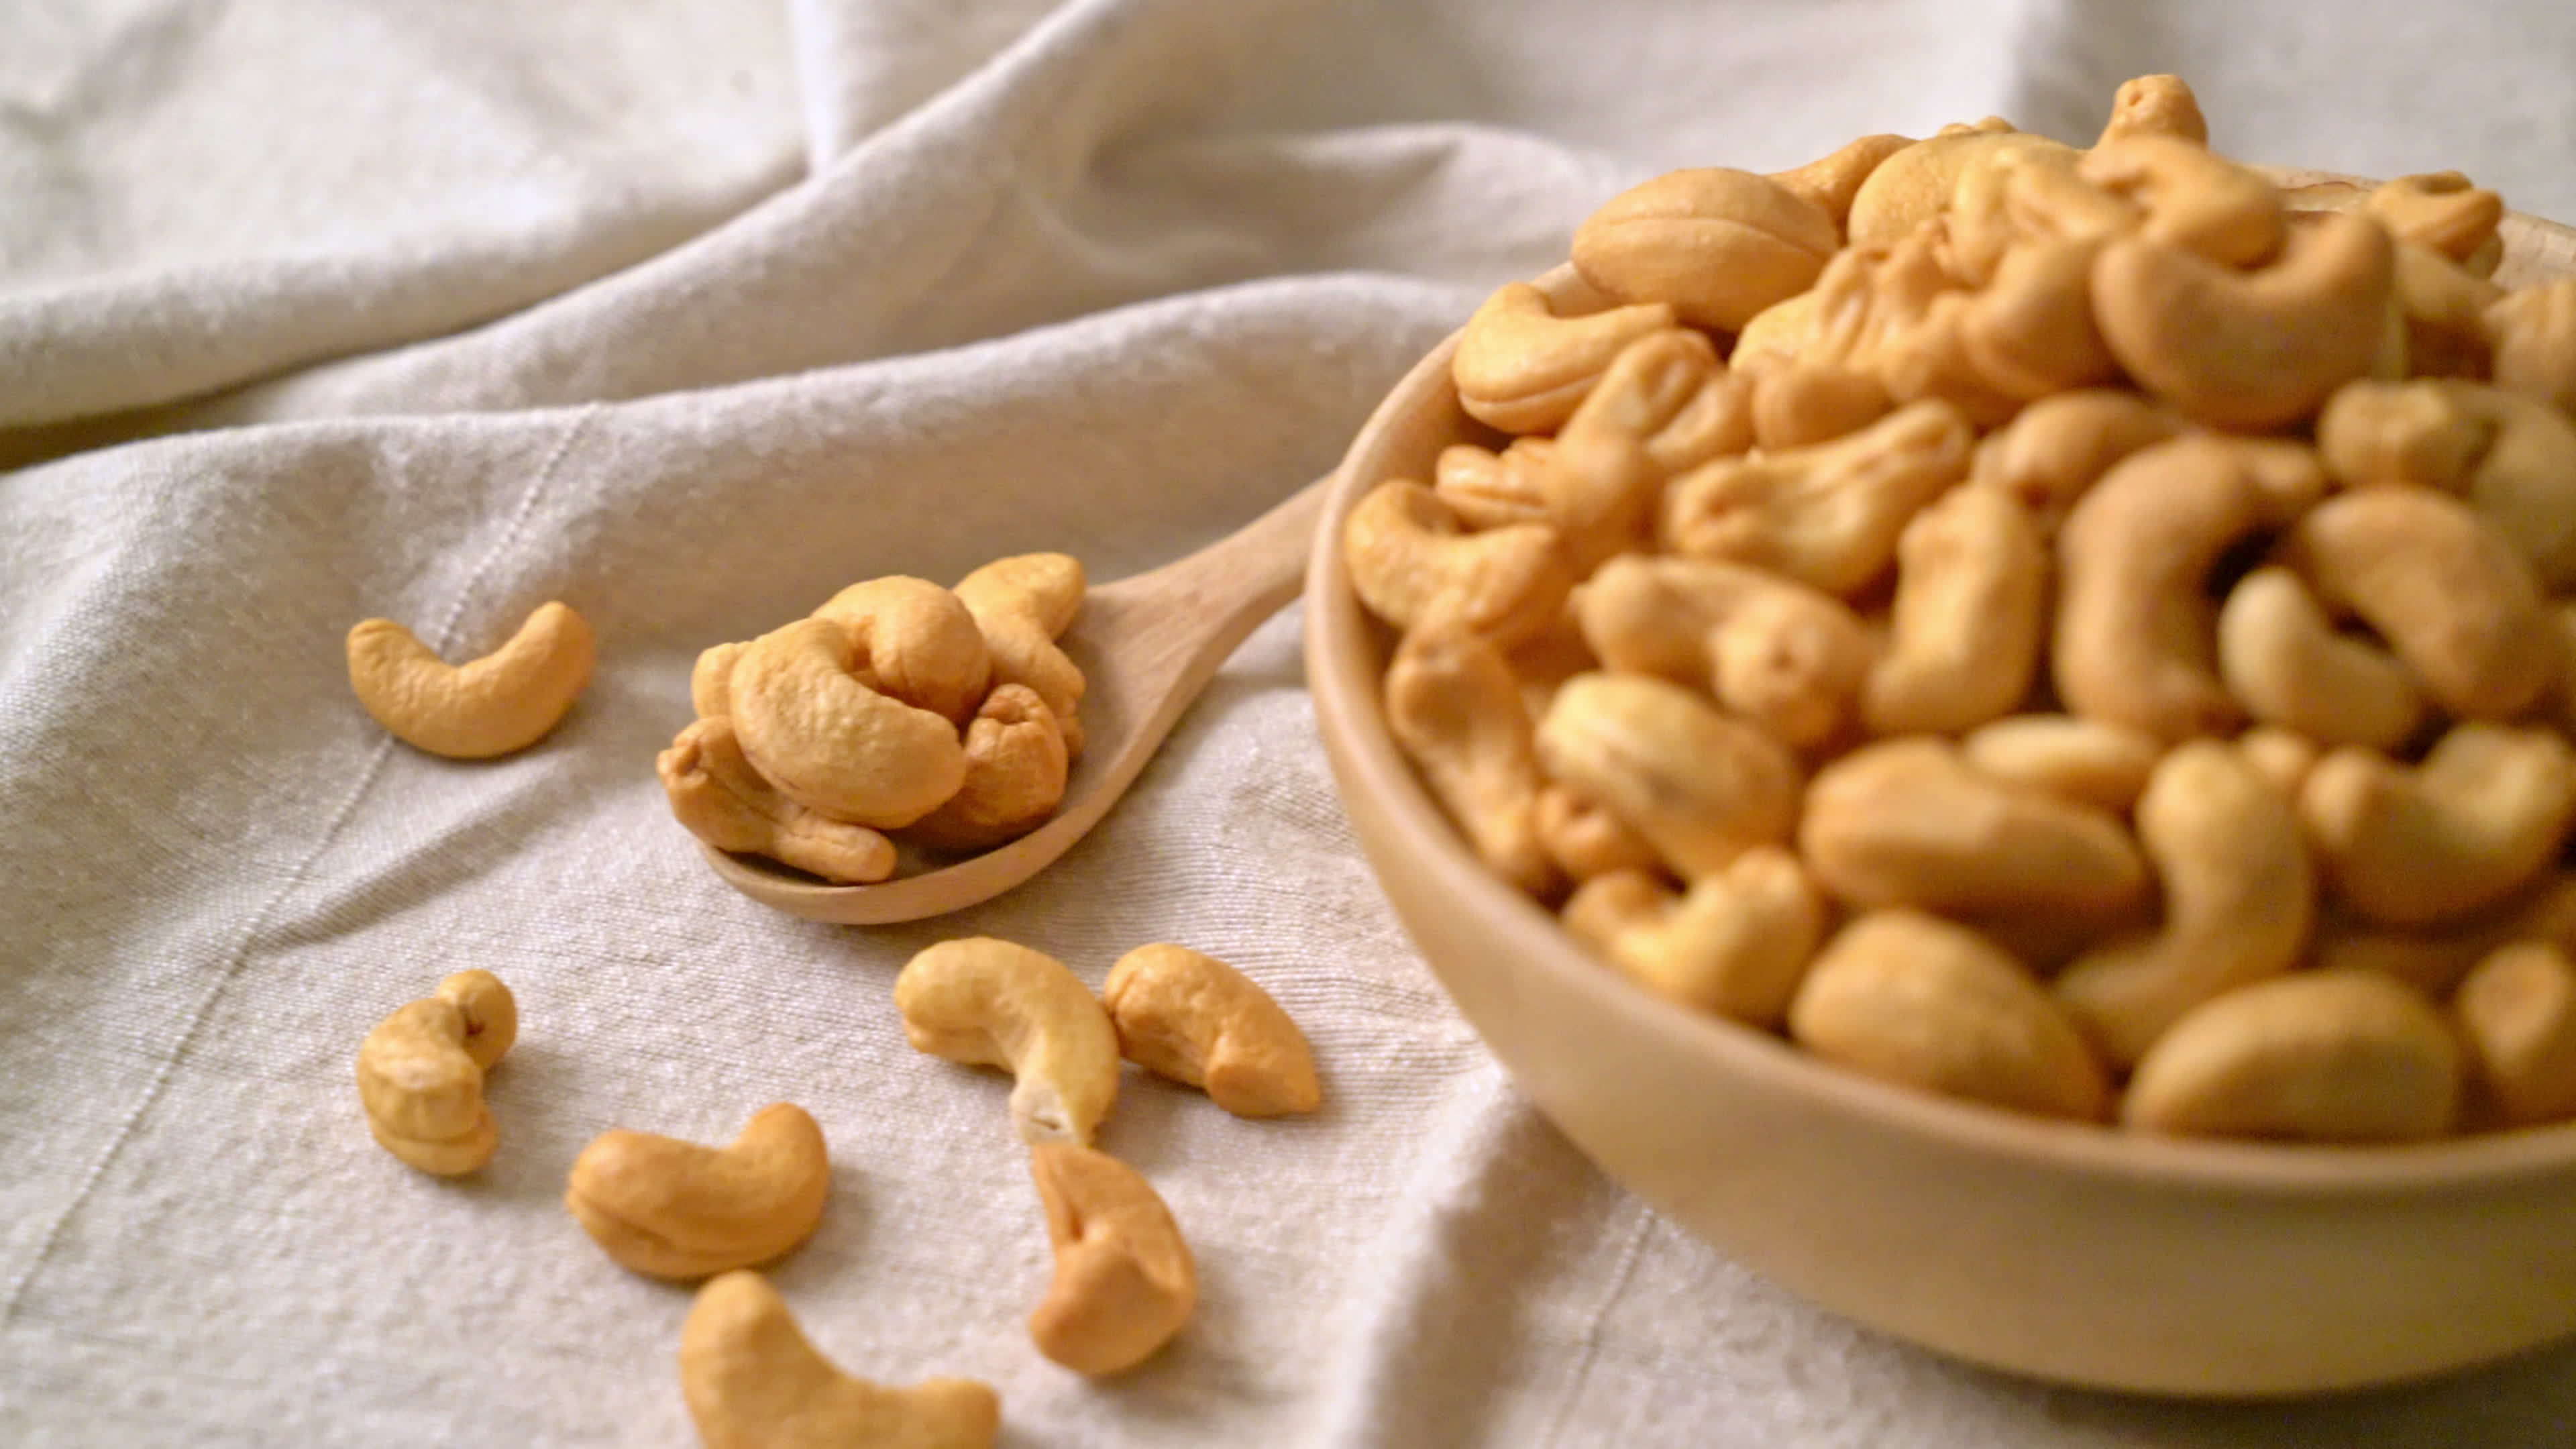 Cashew Nuts: A kidney-shaped seed sourced from the cashew tree, A snack nut. 3840x2160 4K Background.